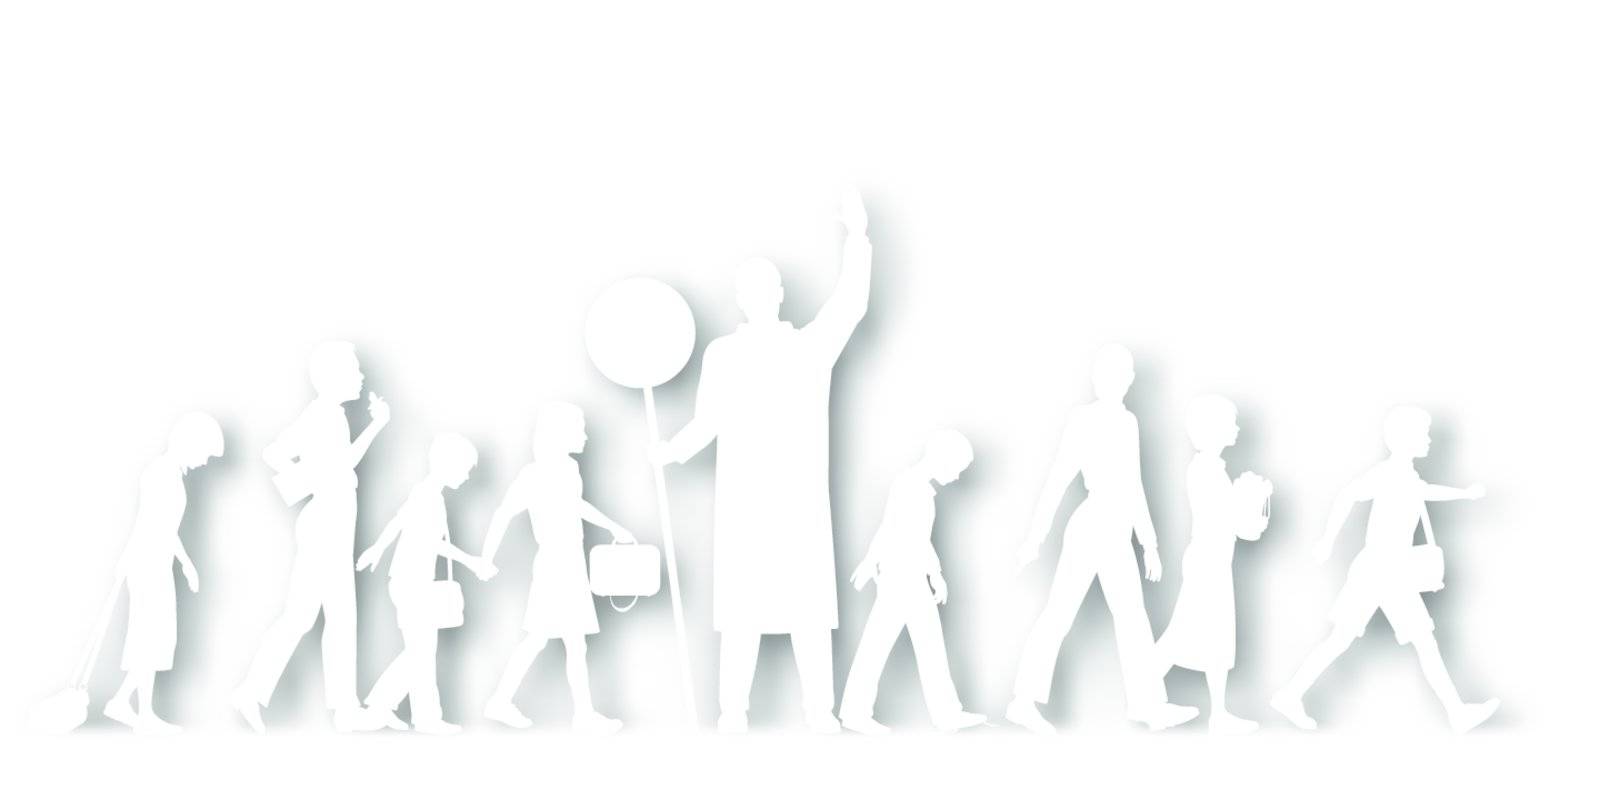 Editable vector cutout silhouettes of school children crossing a road with background shadow made using a gradient mesh